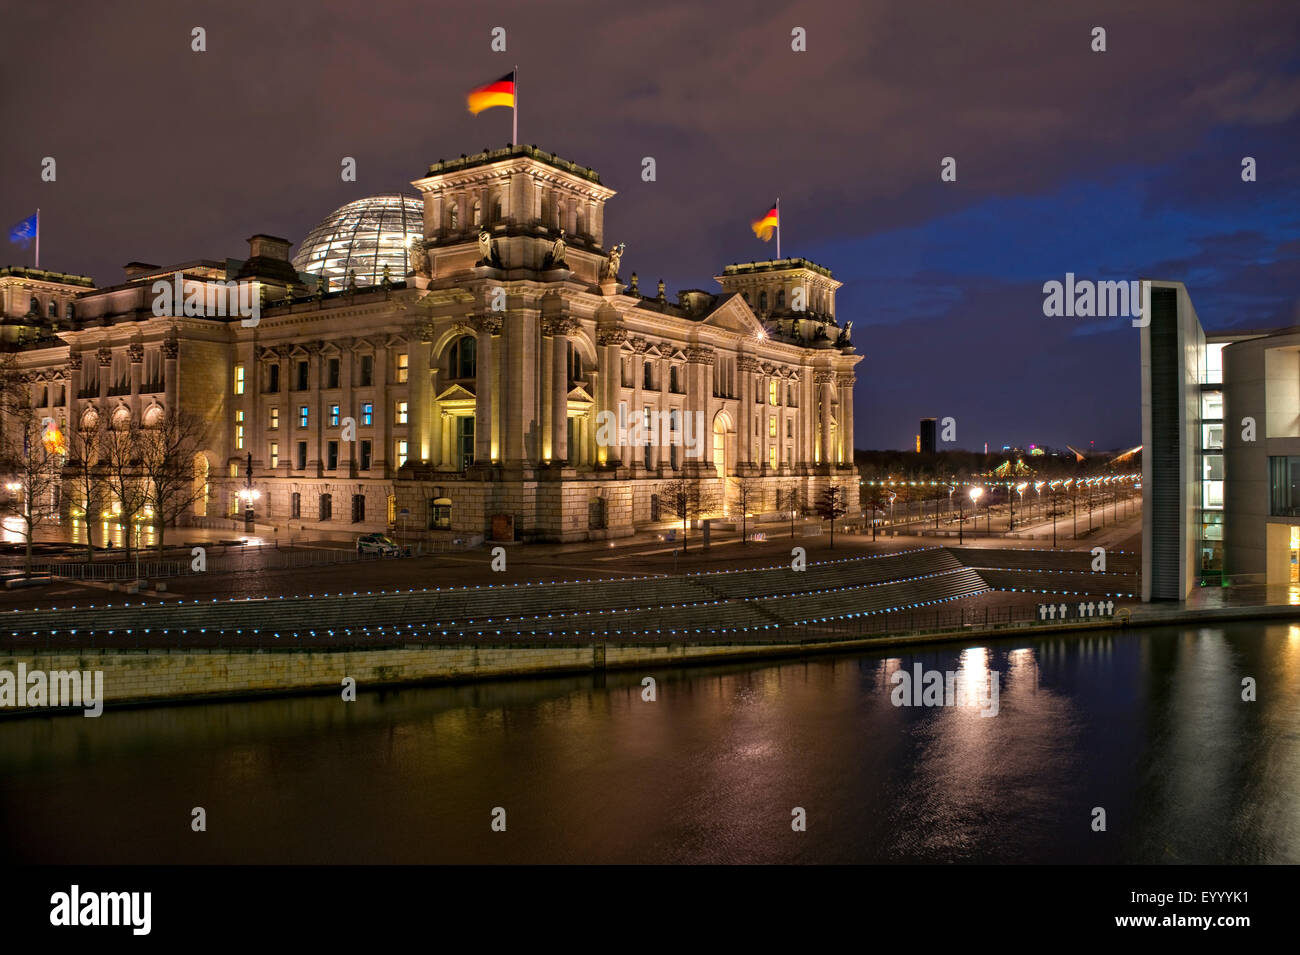 Reichstag building at night, Germany, Berlin Stock Photo